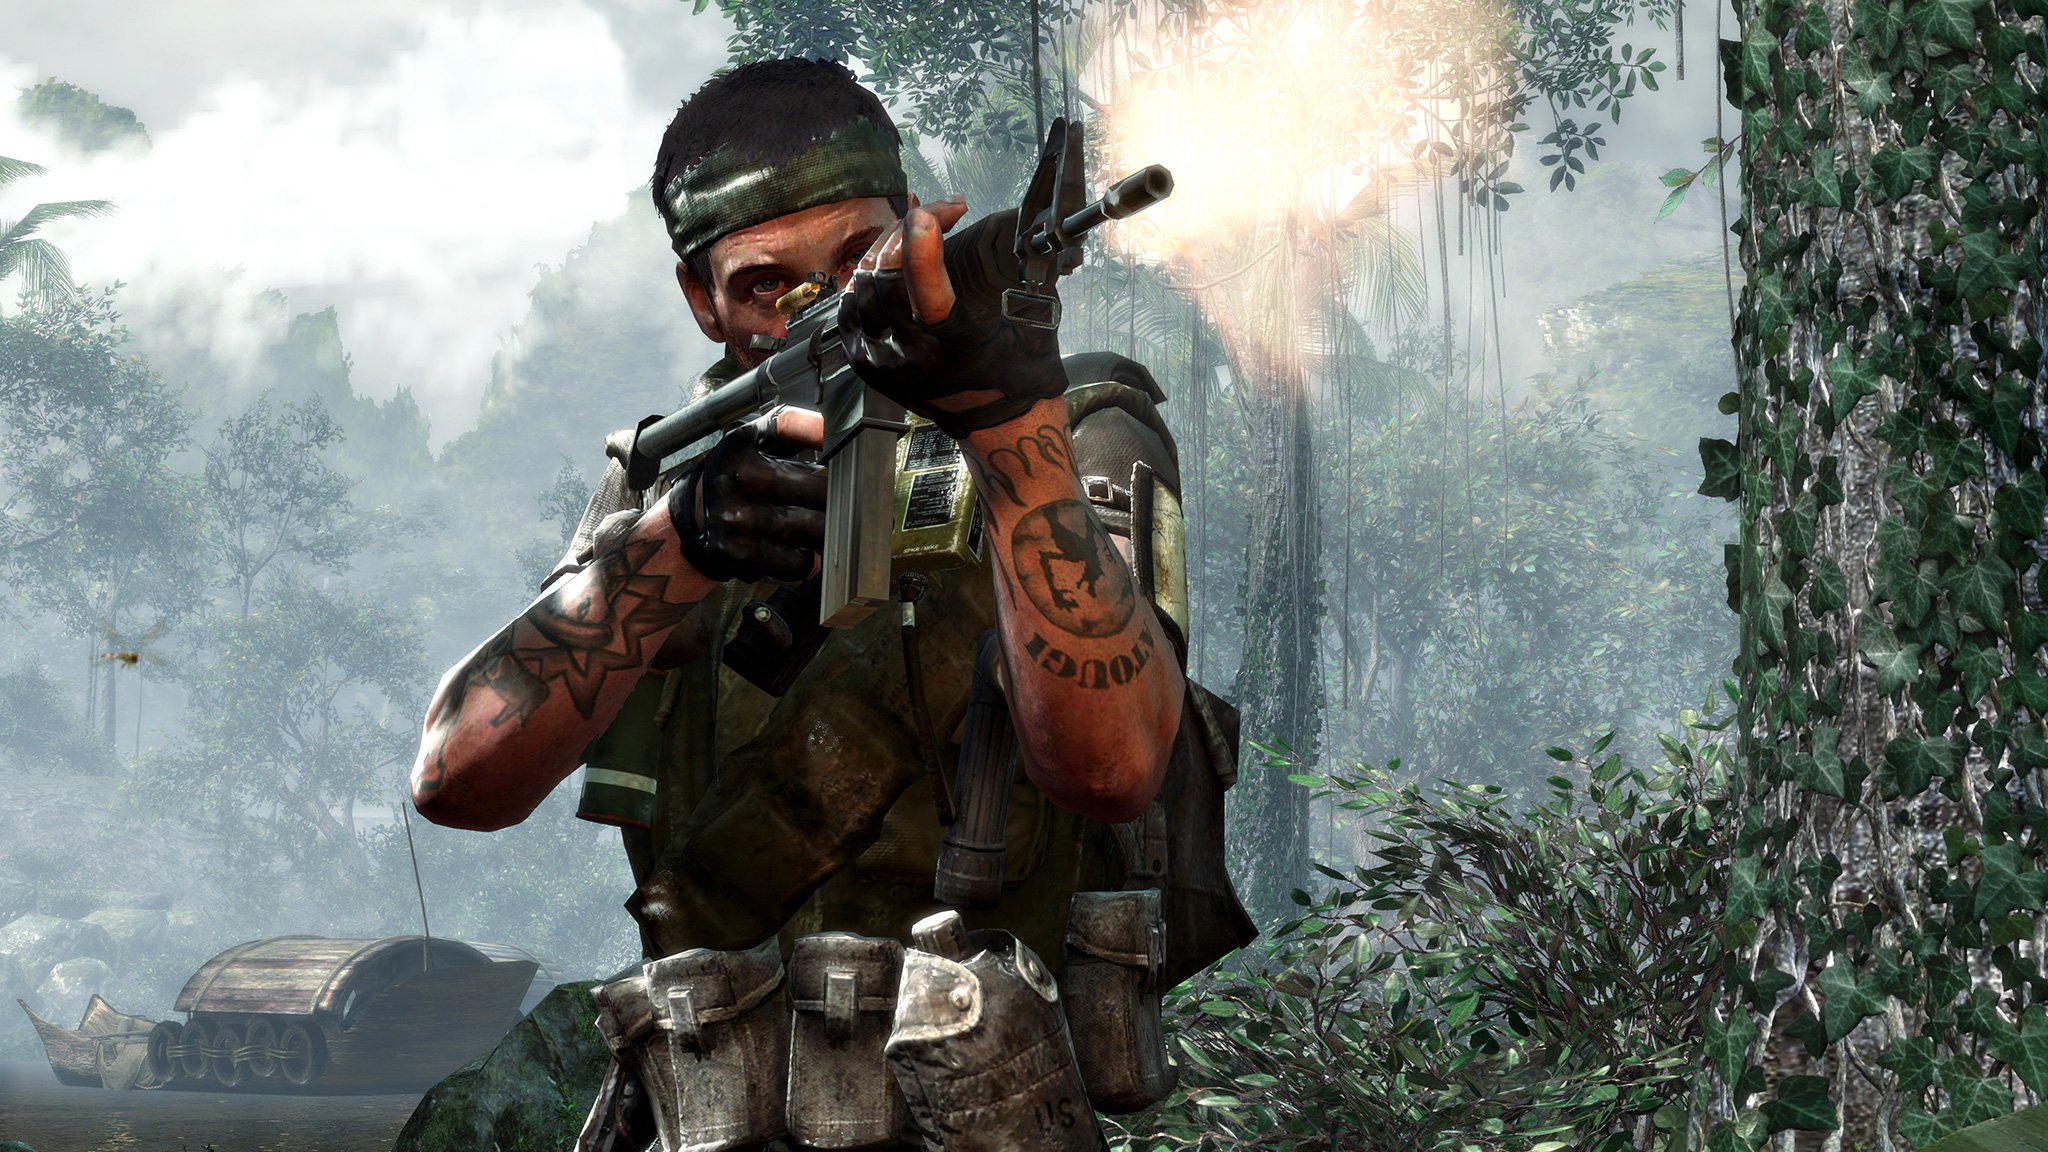 Call of Duty 2020 is reportedly ‘a gritty Black Ops reboot’ | VGC